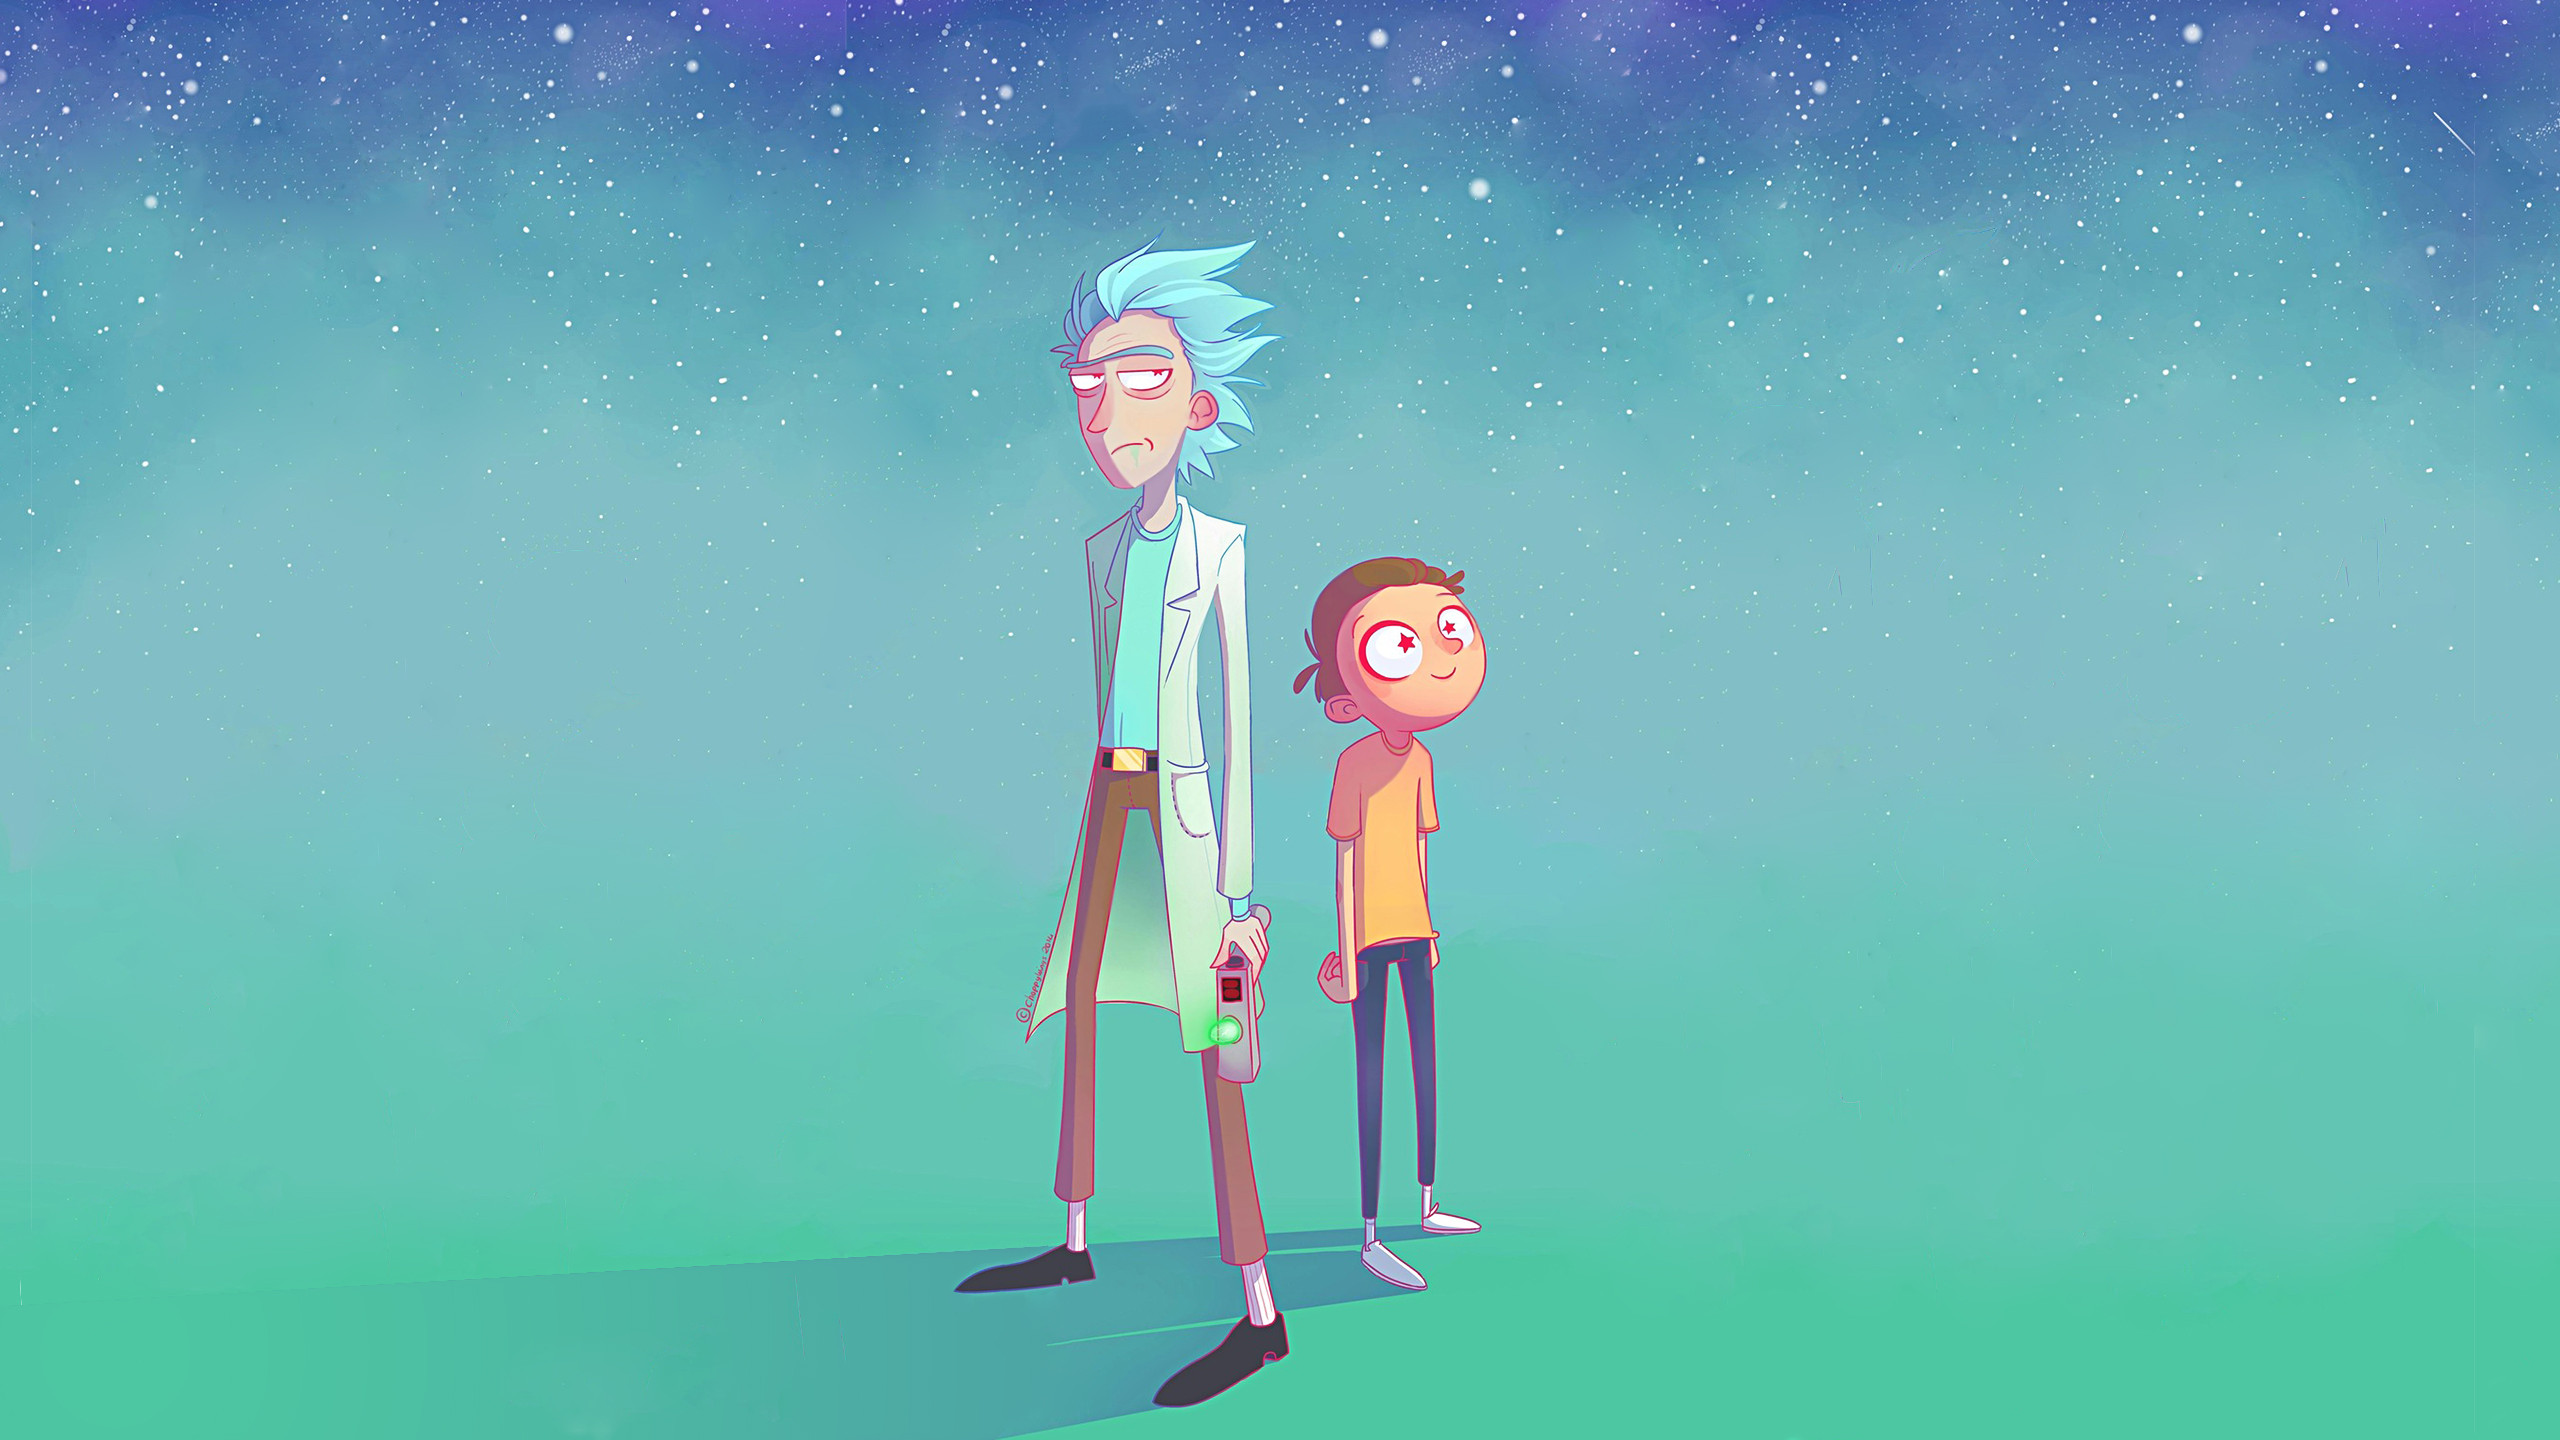 rick and morty wallpaper 4k iphone